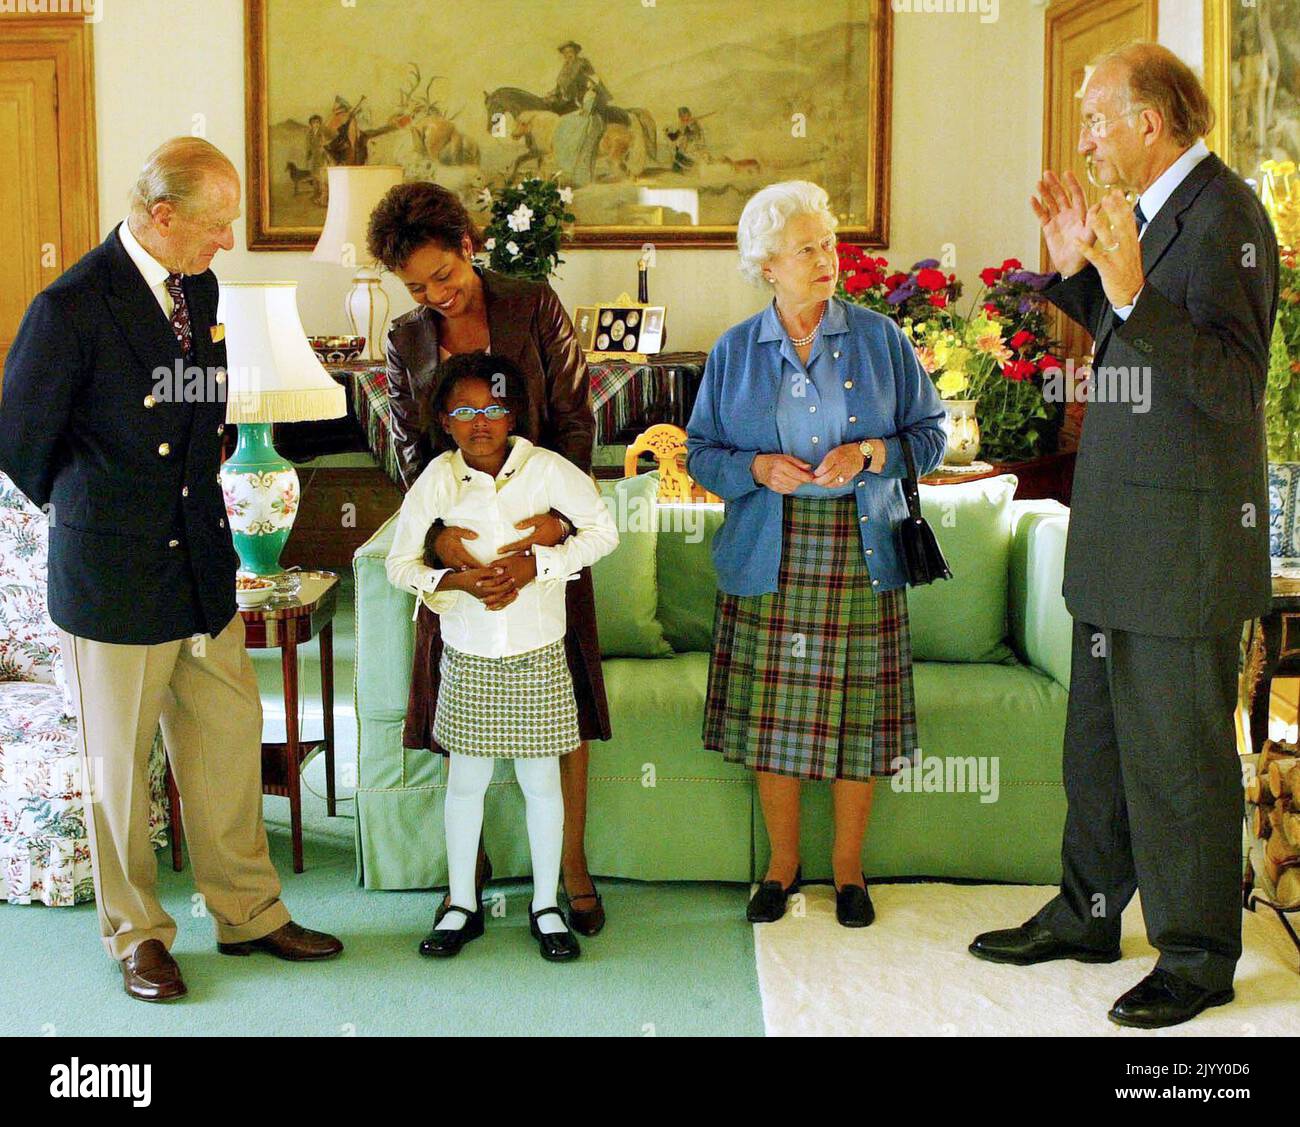 File photo dated 6/9/2005 of Queen Elizabeth II and the Duke of Edinburgh talking to the Governor General Designate of Canada Michaelle Jean, her daughter Mlle Marie-Eden Lafond and Jean-Daniel Lafond at Balmoral castle in Aberdeenshire. Scotland was a special place for the Queen over the decades, both for holidays and royal duties. She spent part of her honeymoon at Birkhall on the rural Balmoral estate in Aberdeenshire and the estate was her favoured residence in Scotland. Issue date: Thursday September 8, 2022. Stock Photo